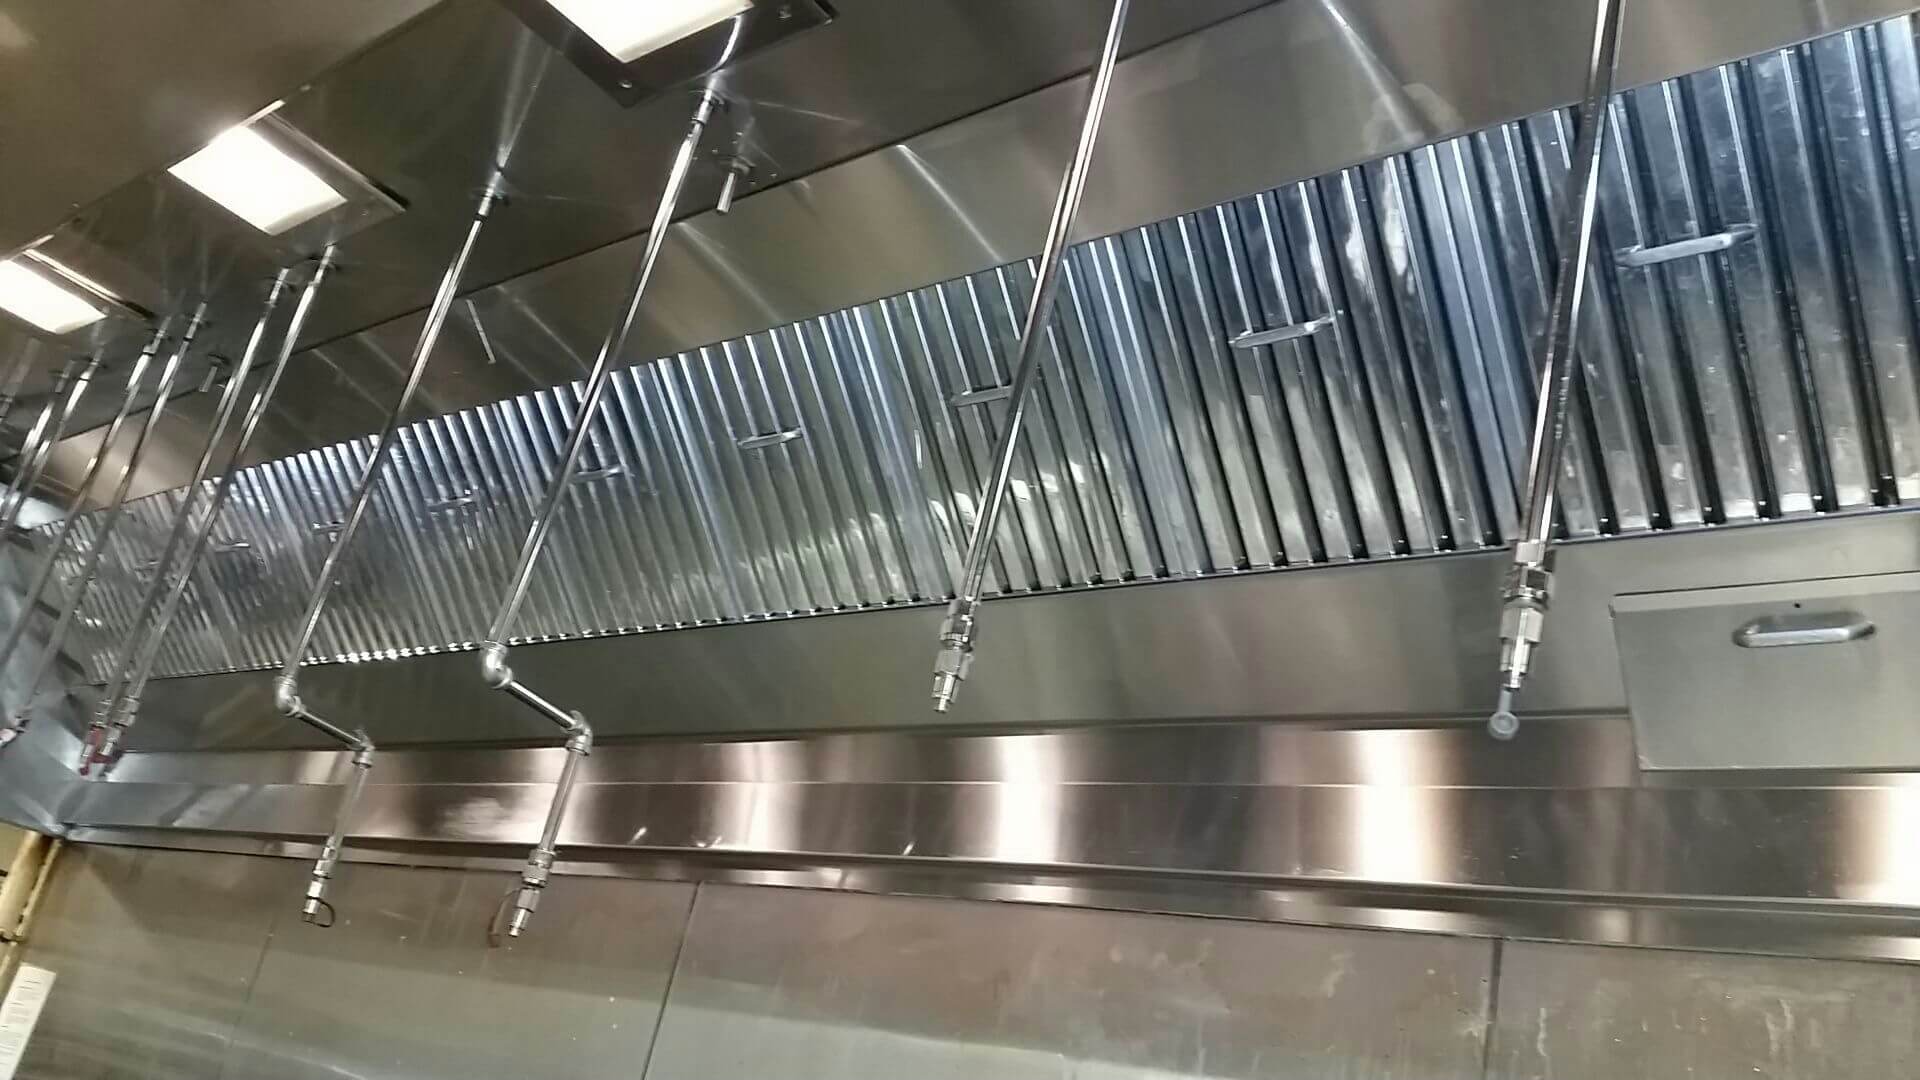 KITCHEN HOOD VENT CLEANING